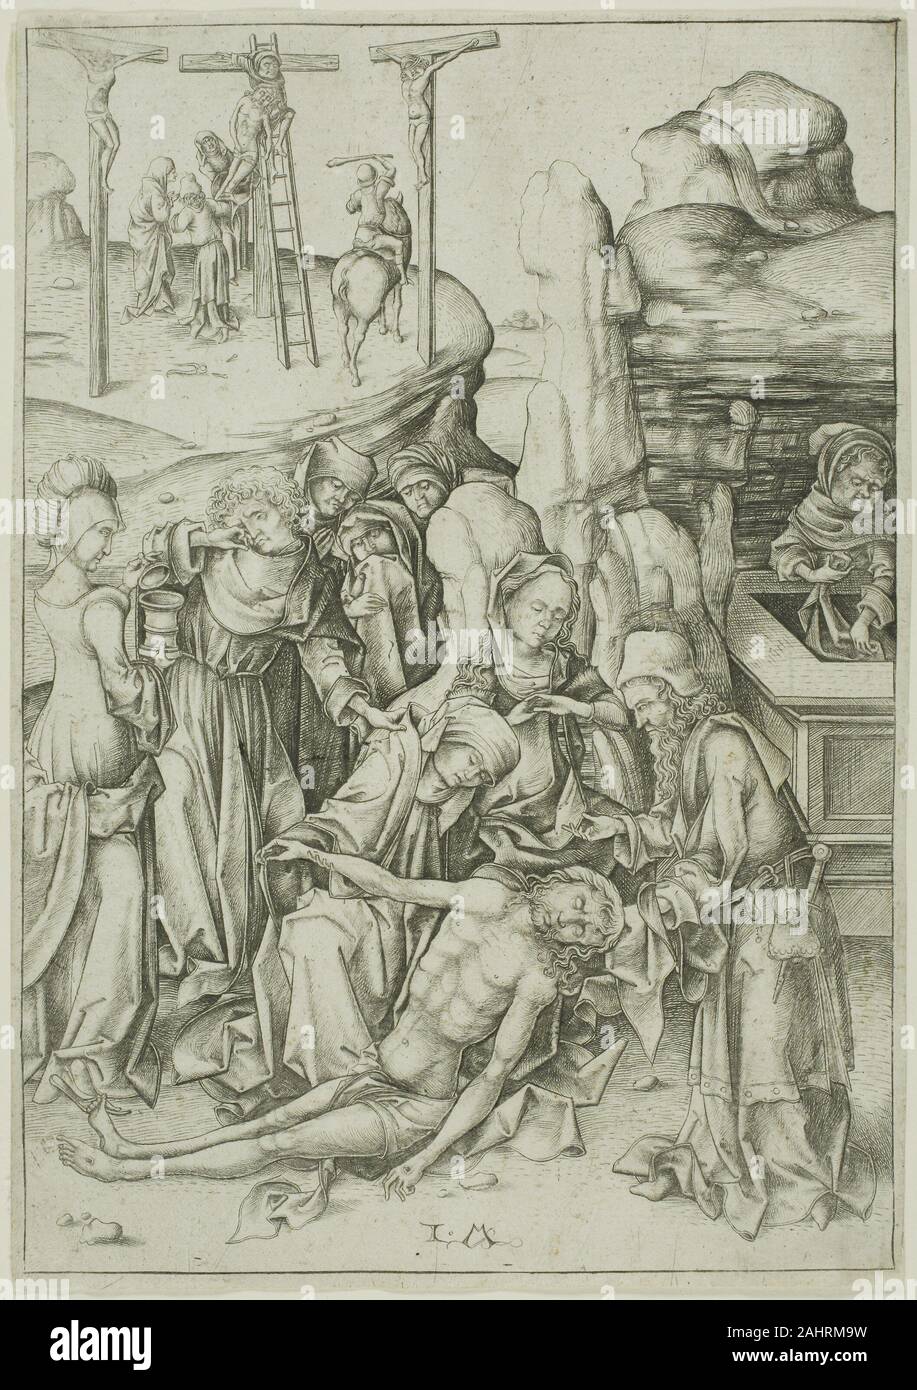 Israhel van Meckenem, the younger. The Lamentation. 1475–1485. Germany. Engraving, printed in black, on off-white laid paper Stock Photo